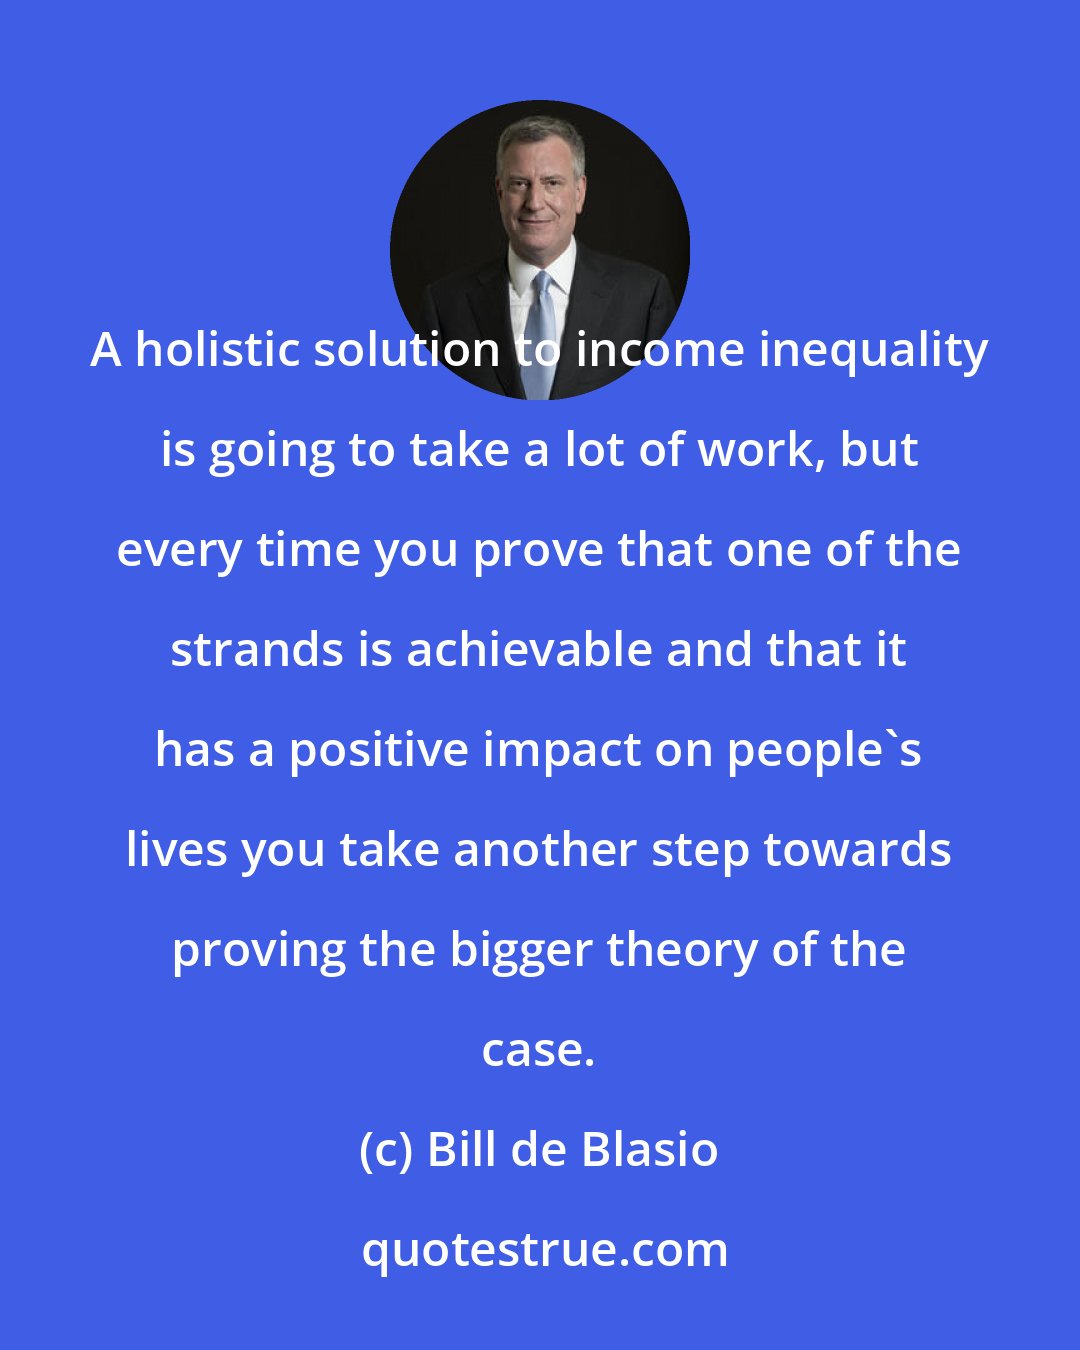 Bill de Blasio: A holistic solution to income inequality is going to take a lot of work, but every time you prove that one of the strands is achievable and that it has a positive impact on people's lives you take another step towards proving the bigger theory of the case.